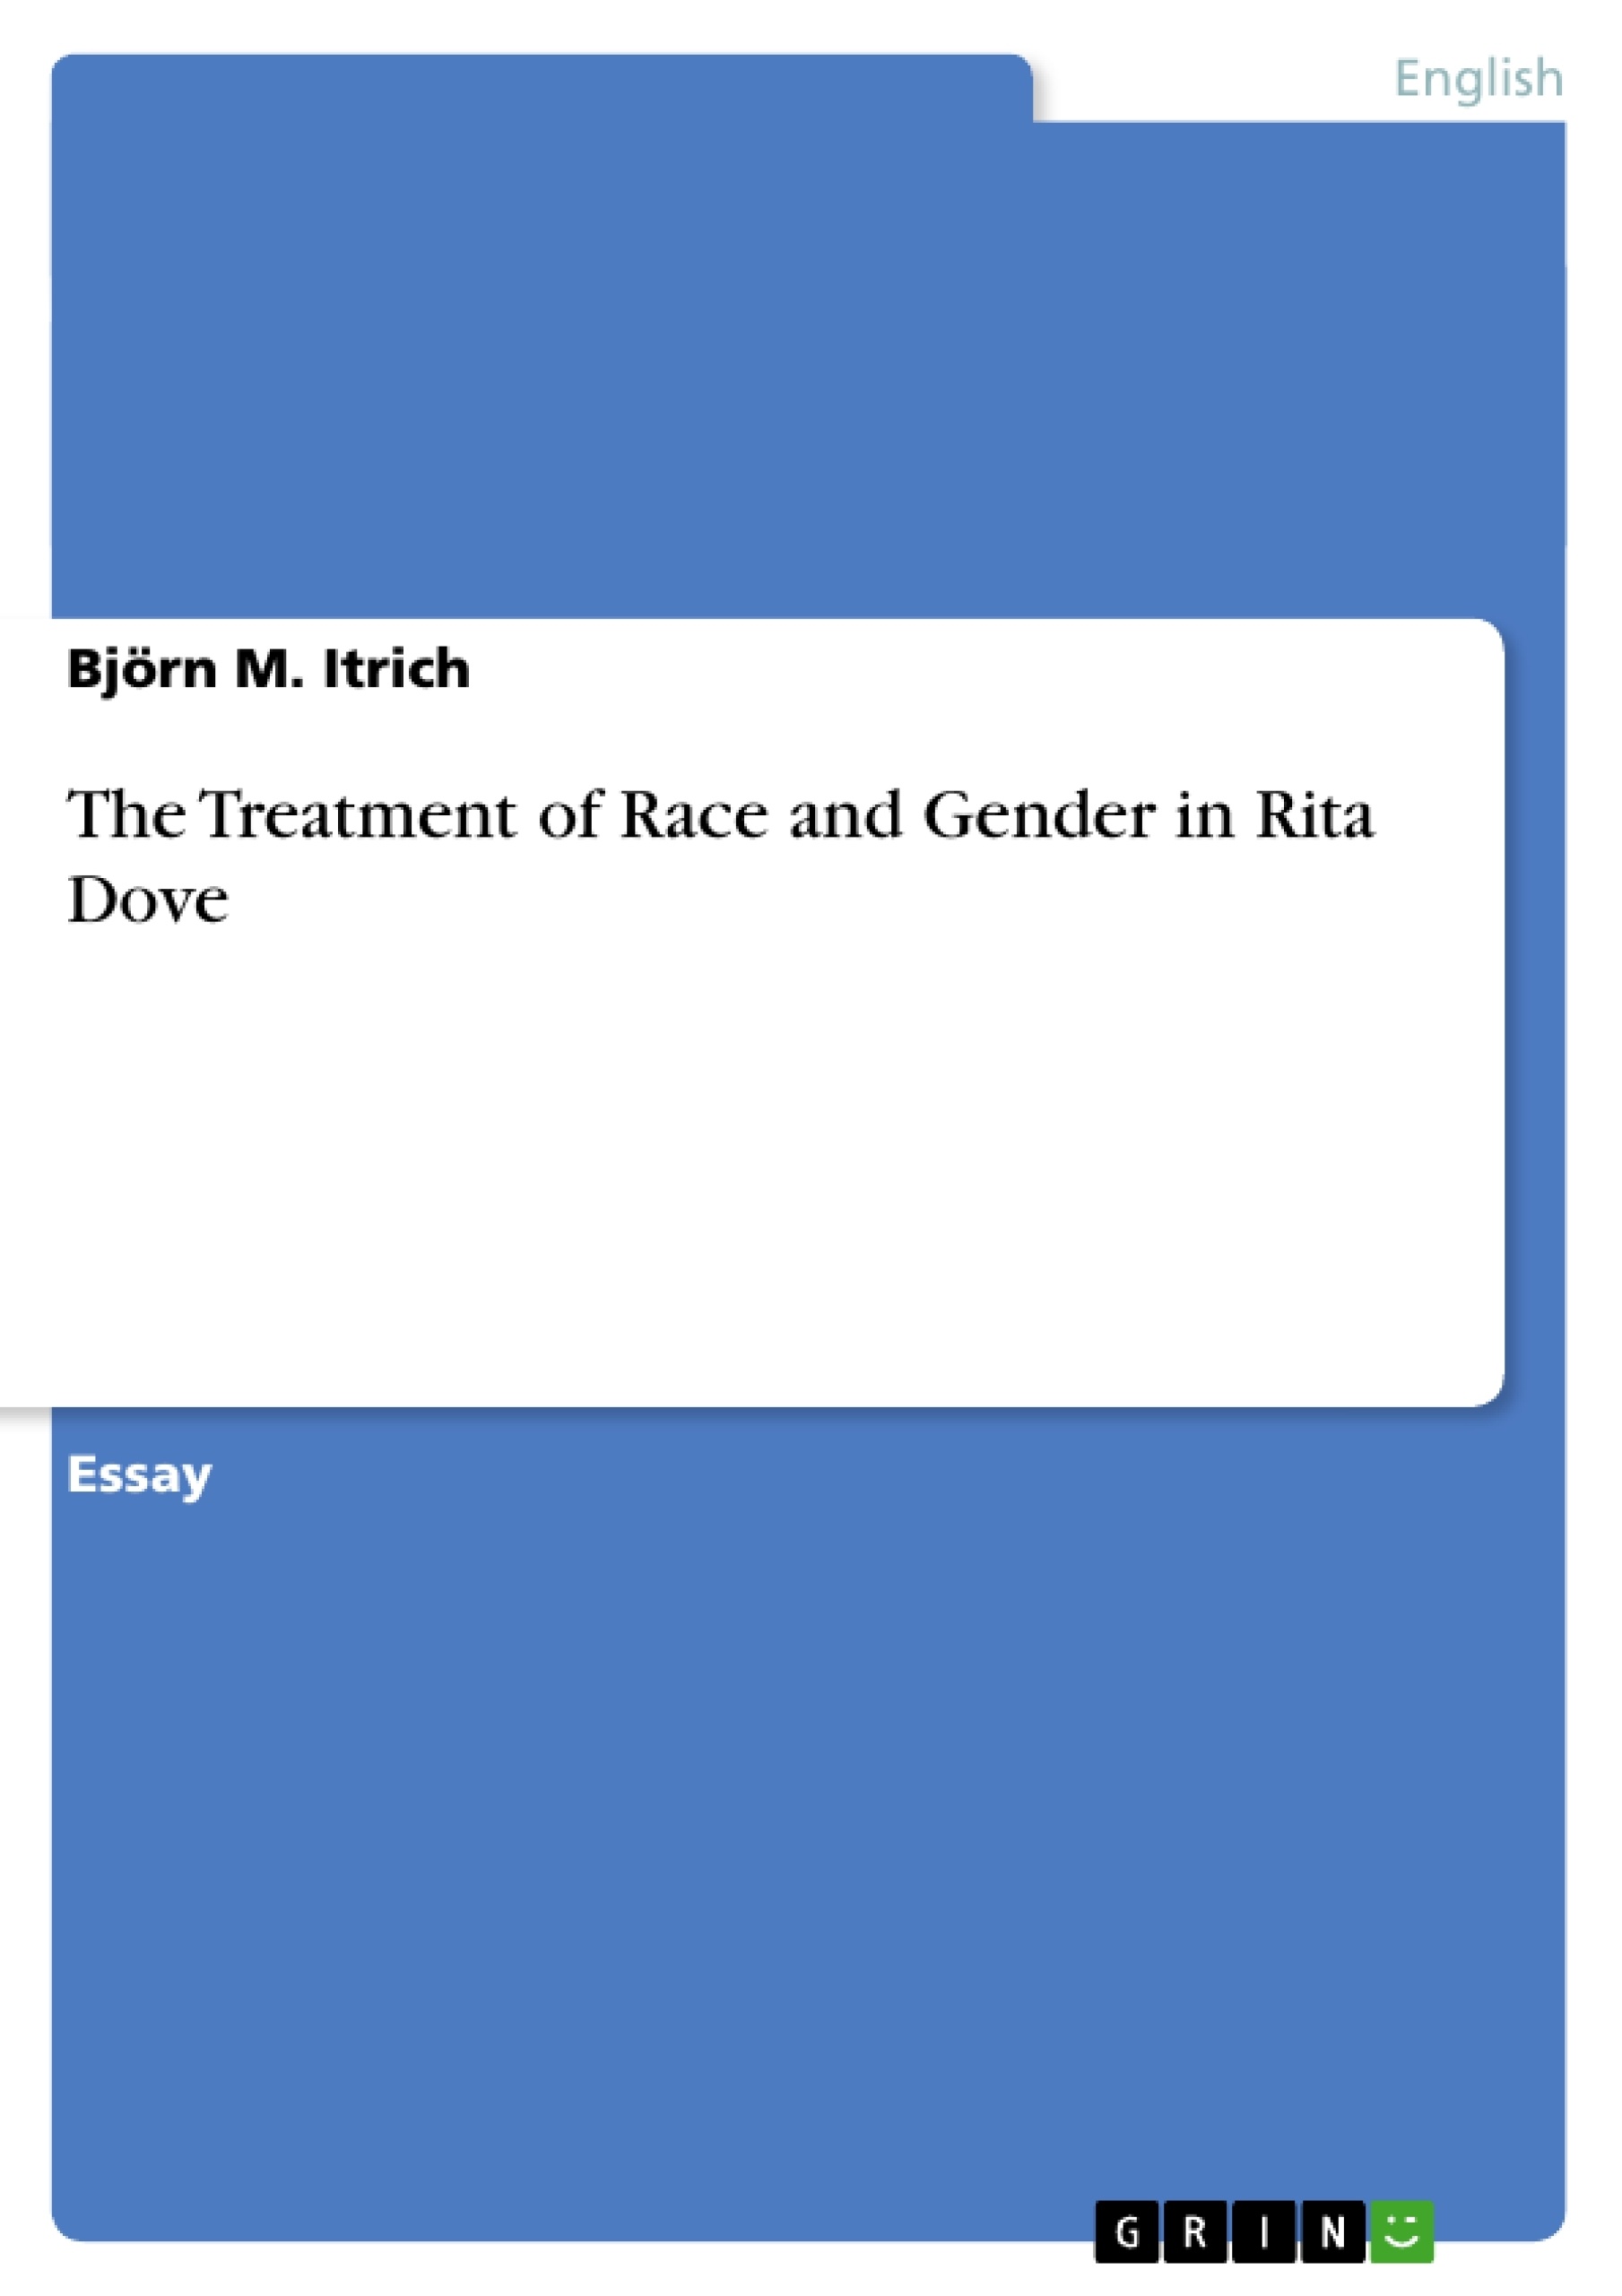 Title: The Treatment of Race and Gender in Rita Dove